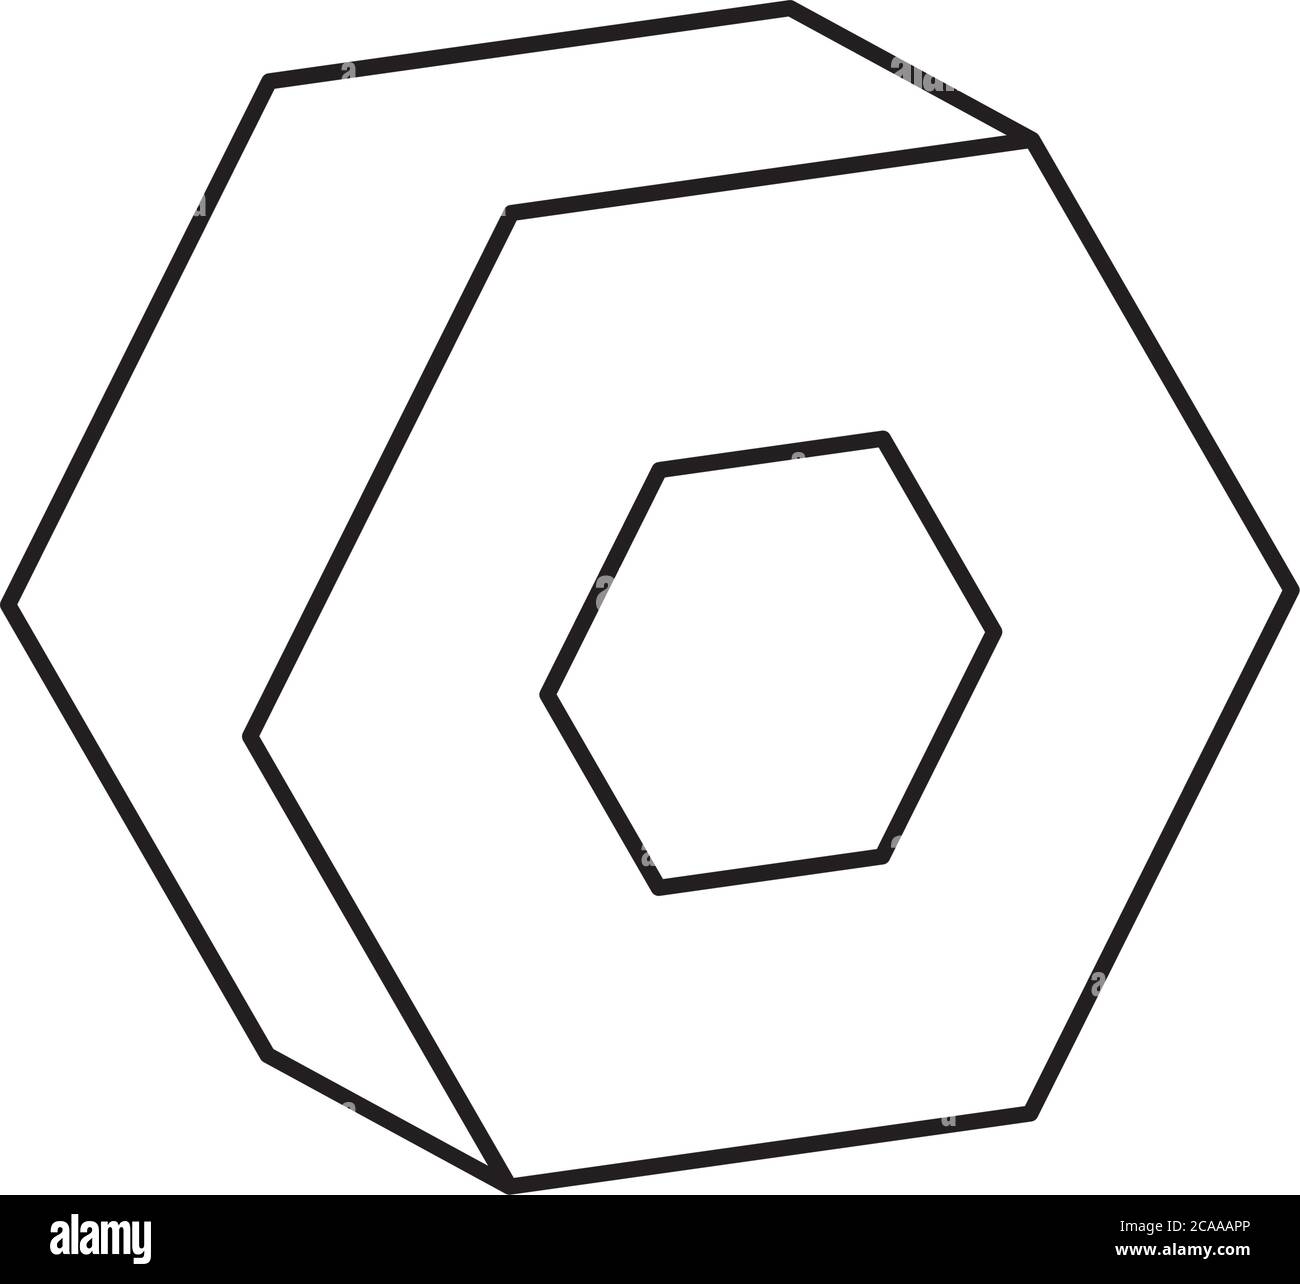 3d Hexagon Geometric Shape Over White Background Line Style Vector